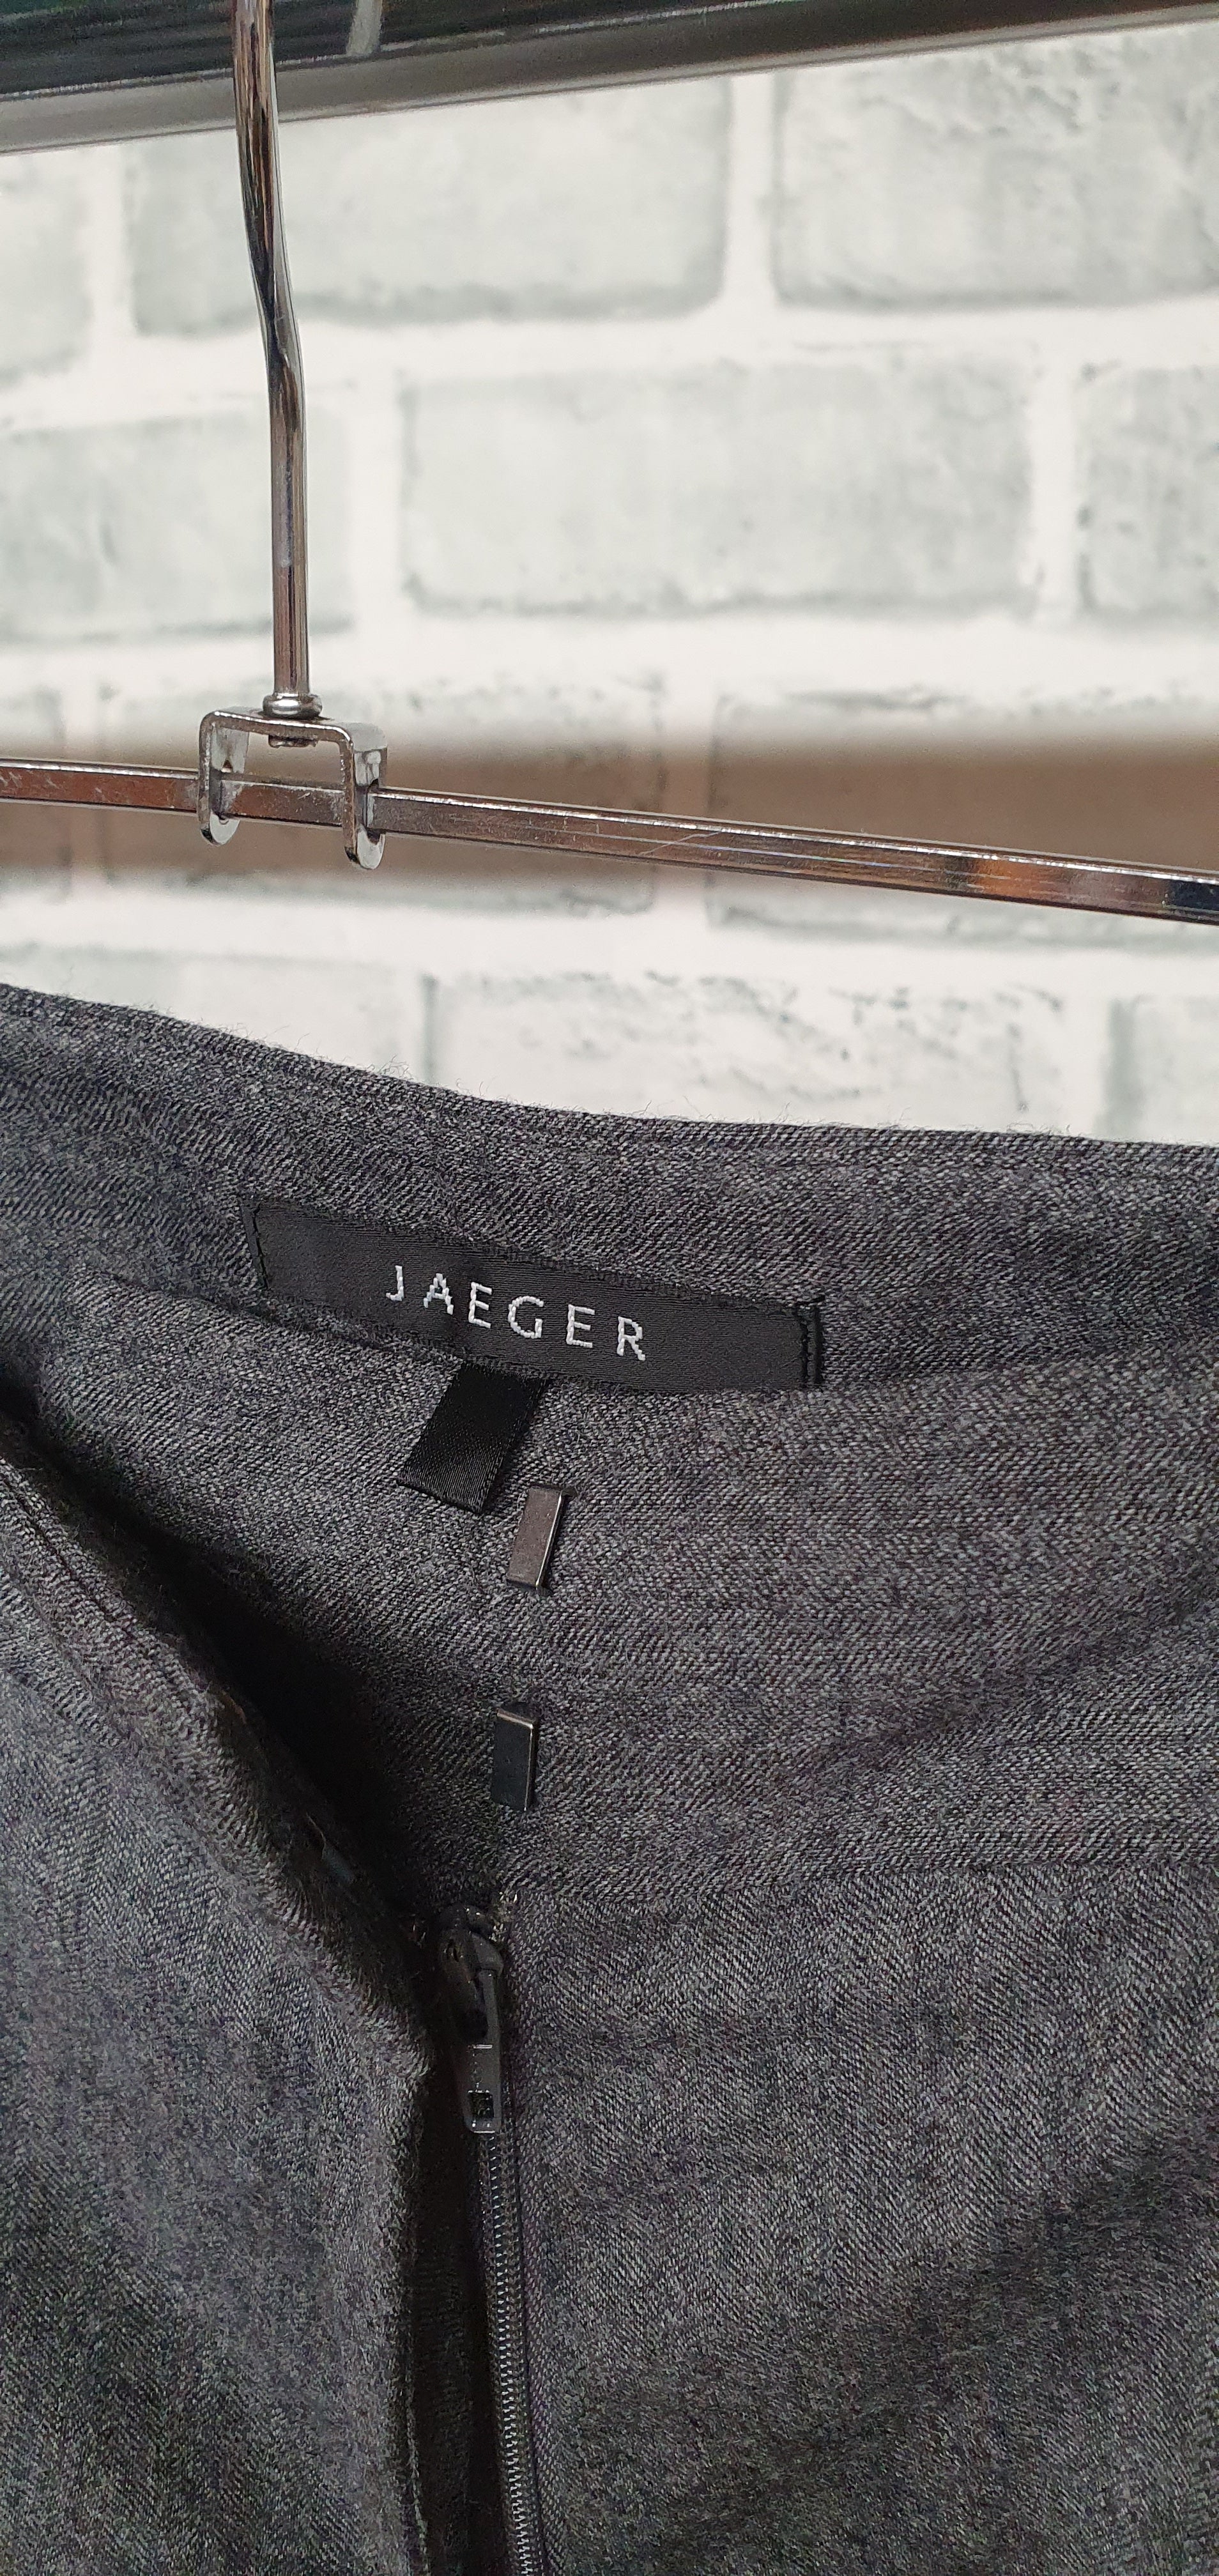 JAEGER Made In France Wide Leg Trouser Pants - Blue 16 | Wide leg trouser,  Trouser pants, Clothes design